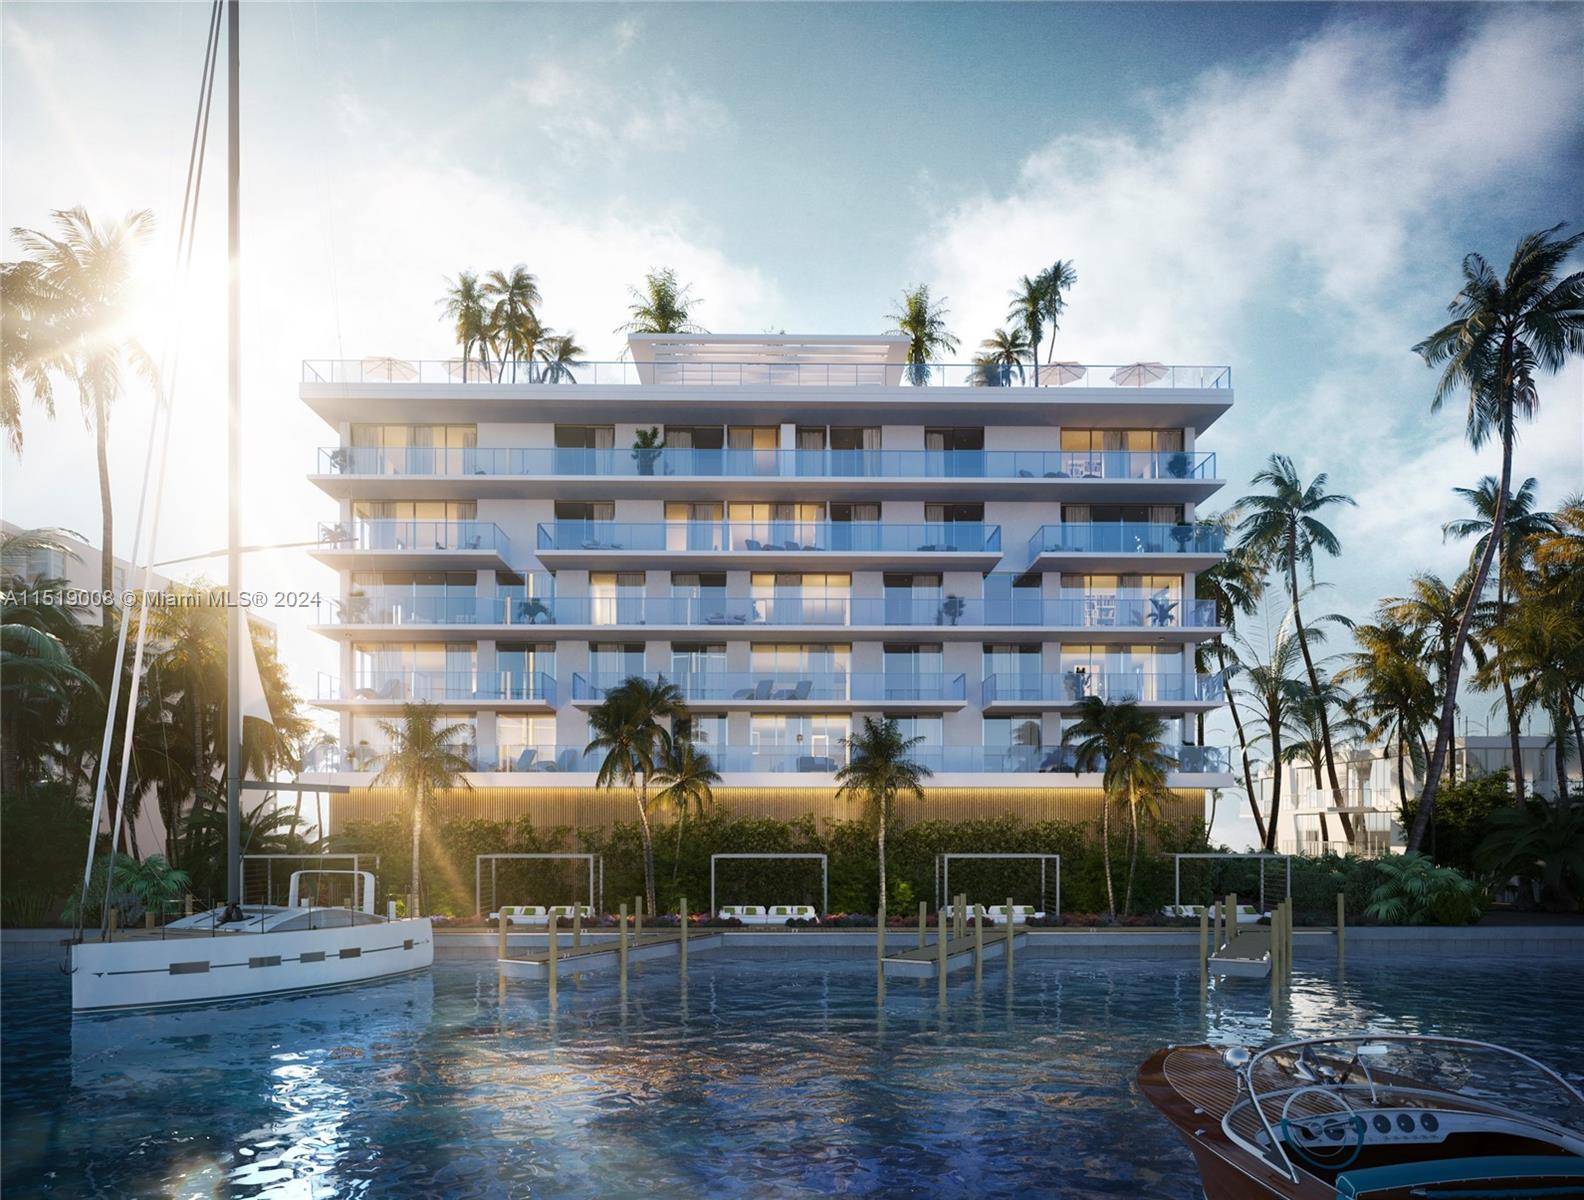 Origin Residences by Artefacto is a luxurious new development located in Bay Harbor Islands, Miami.